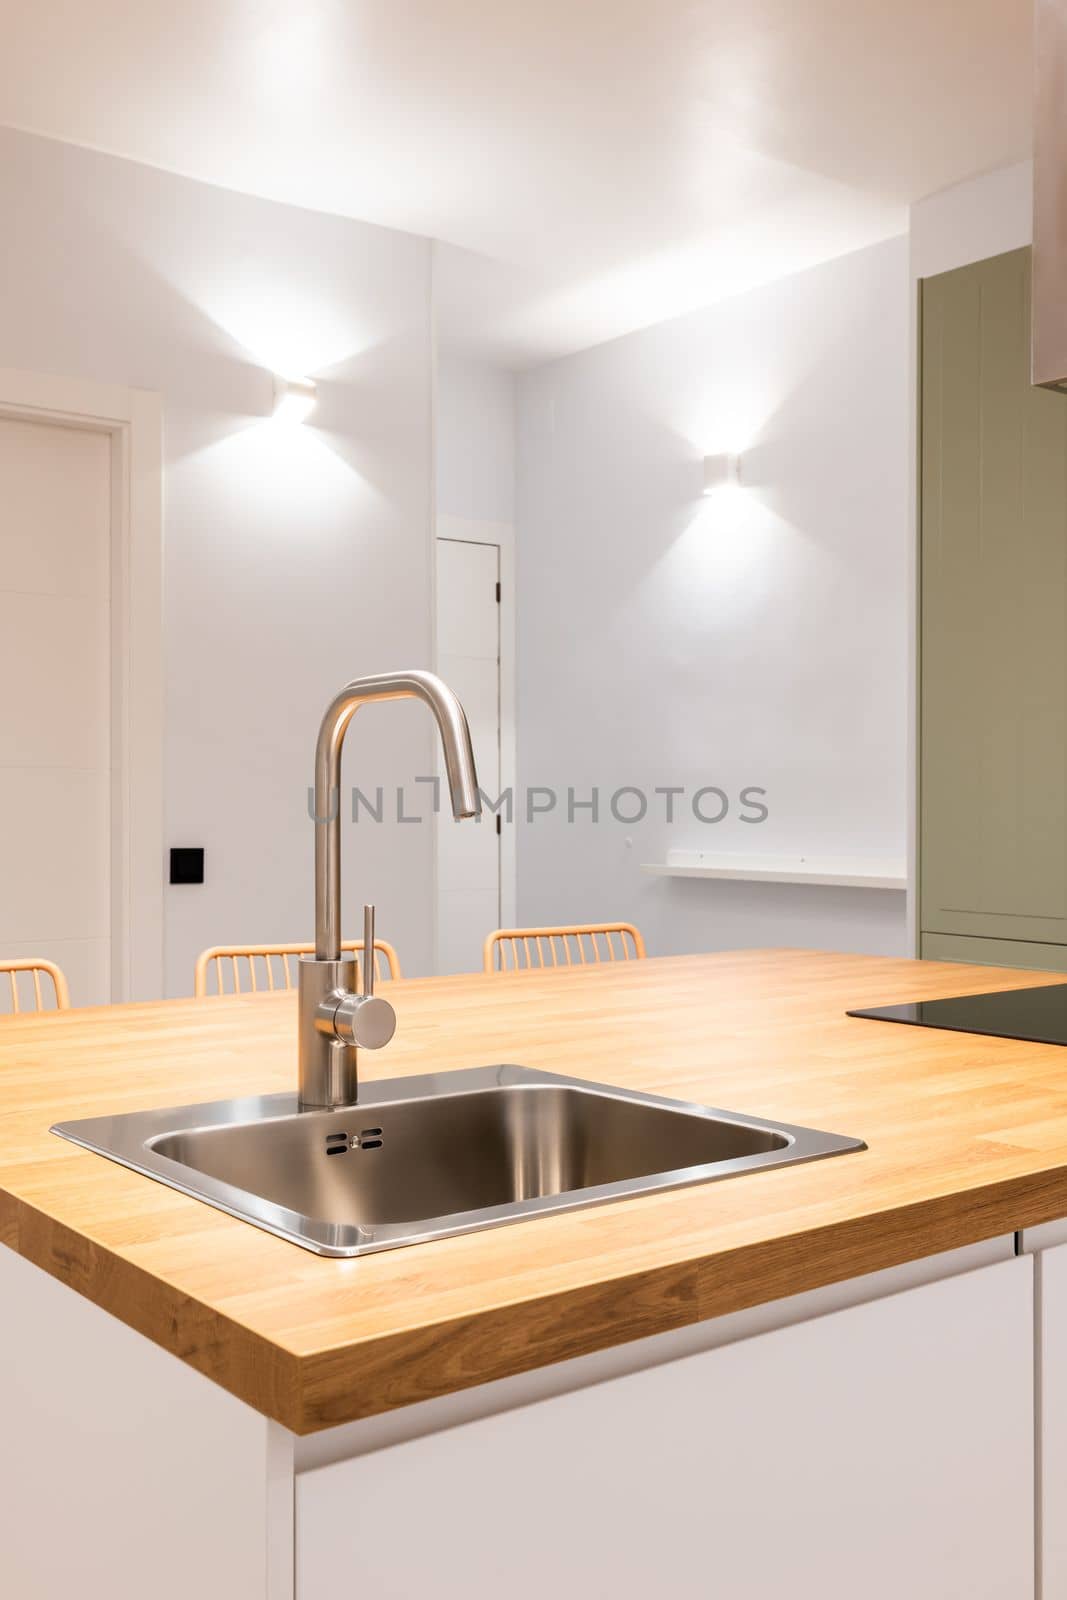 Close-up of sink in wooden countertop in kitchen table. Mixer and sink in chromed metal. The kitchen is lit with bright designer wall lights. Kitchen area at the entrance to studio apartment